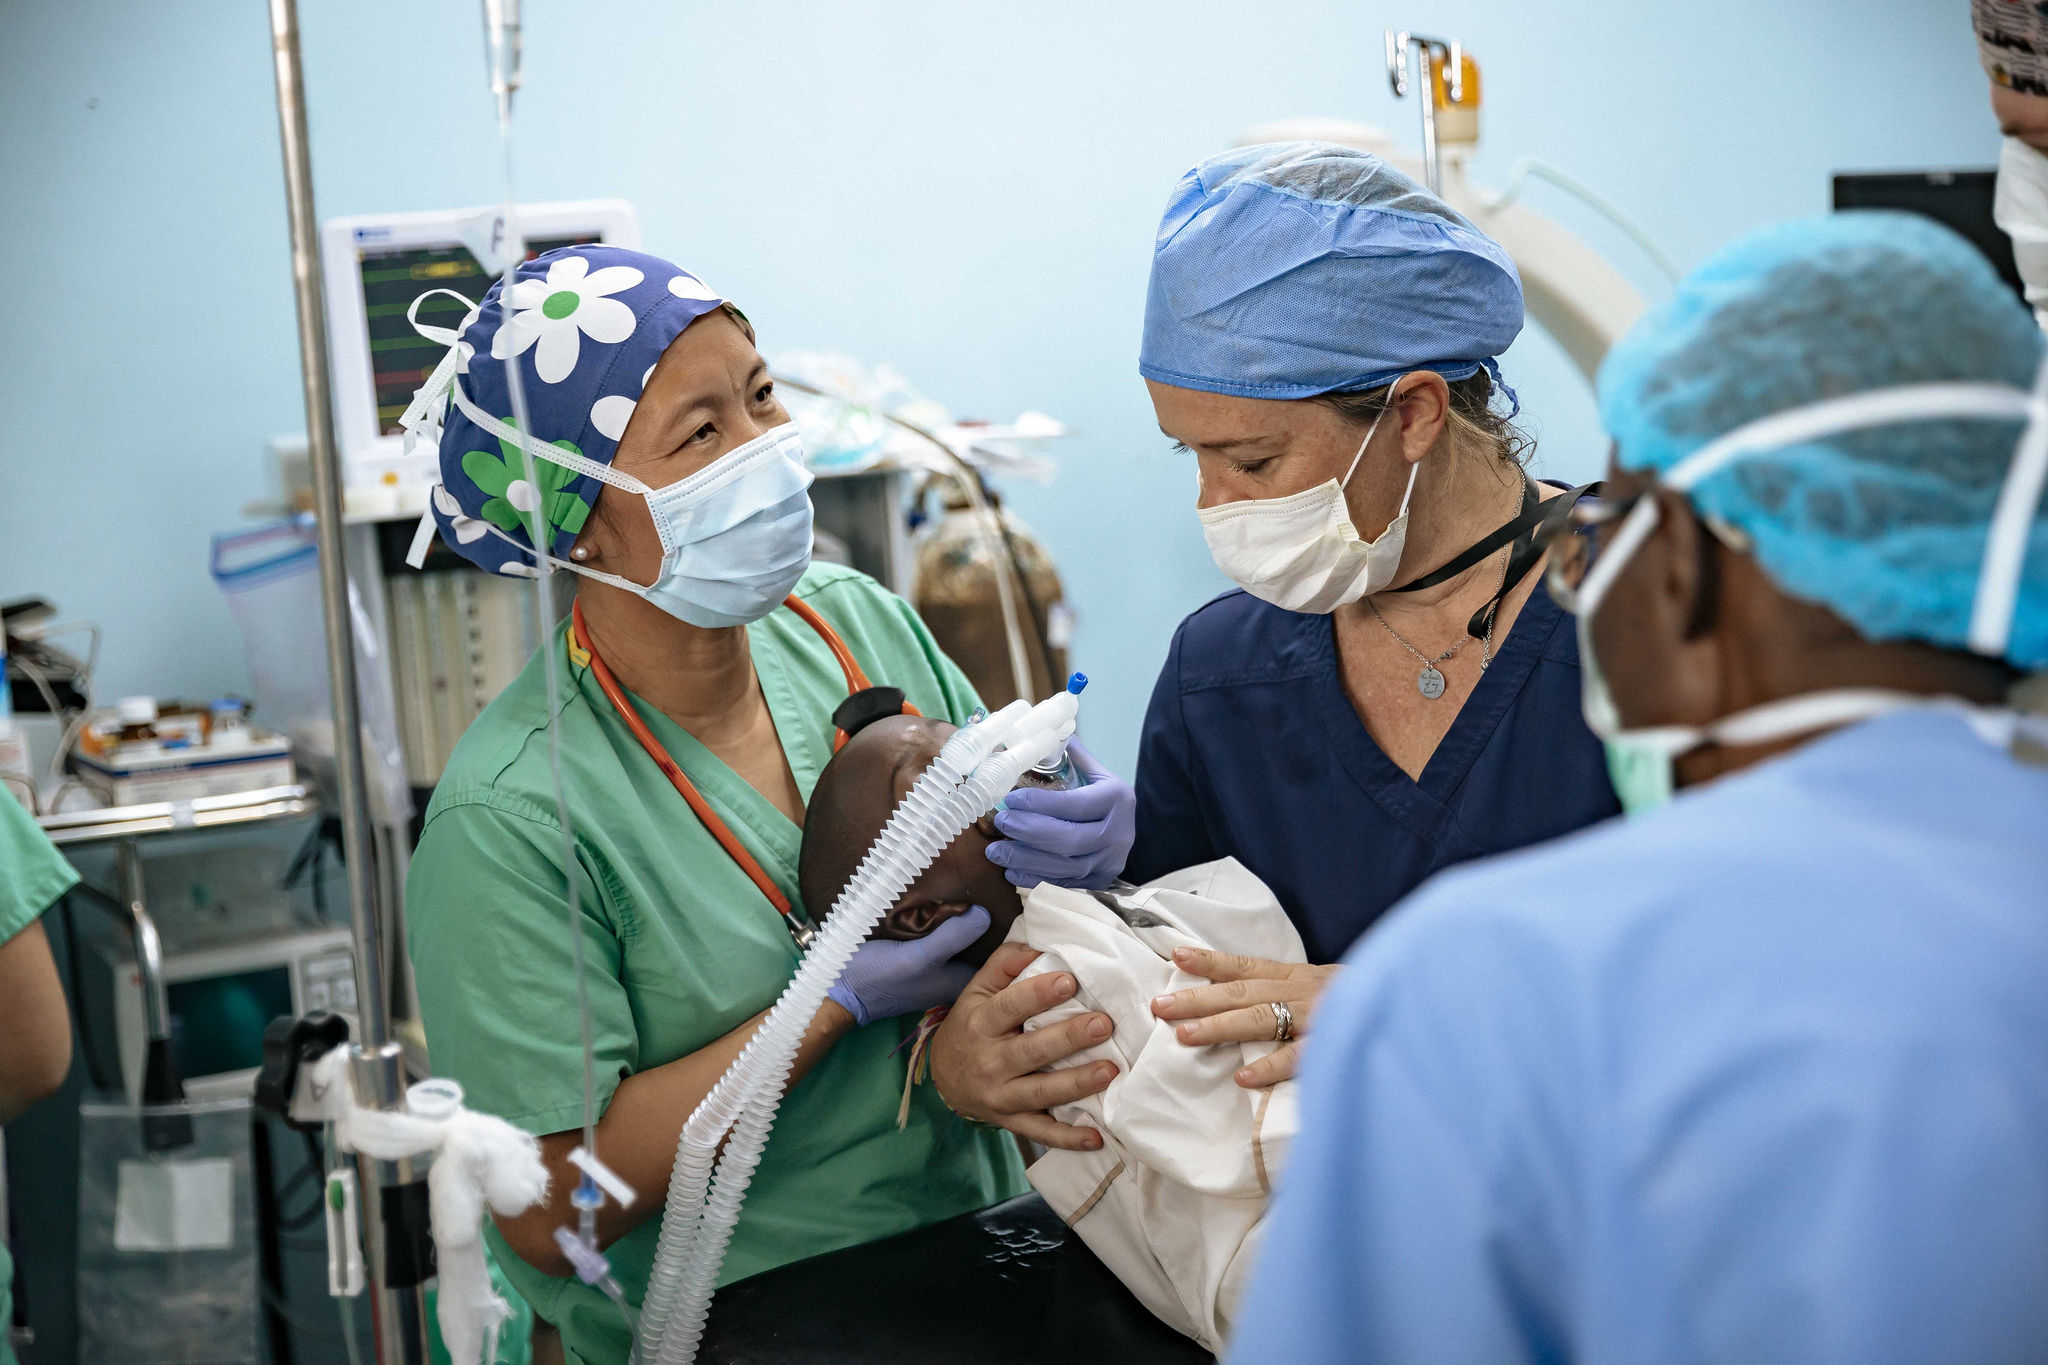 Surgeons holding a small child in an operating room